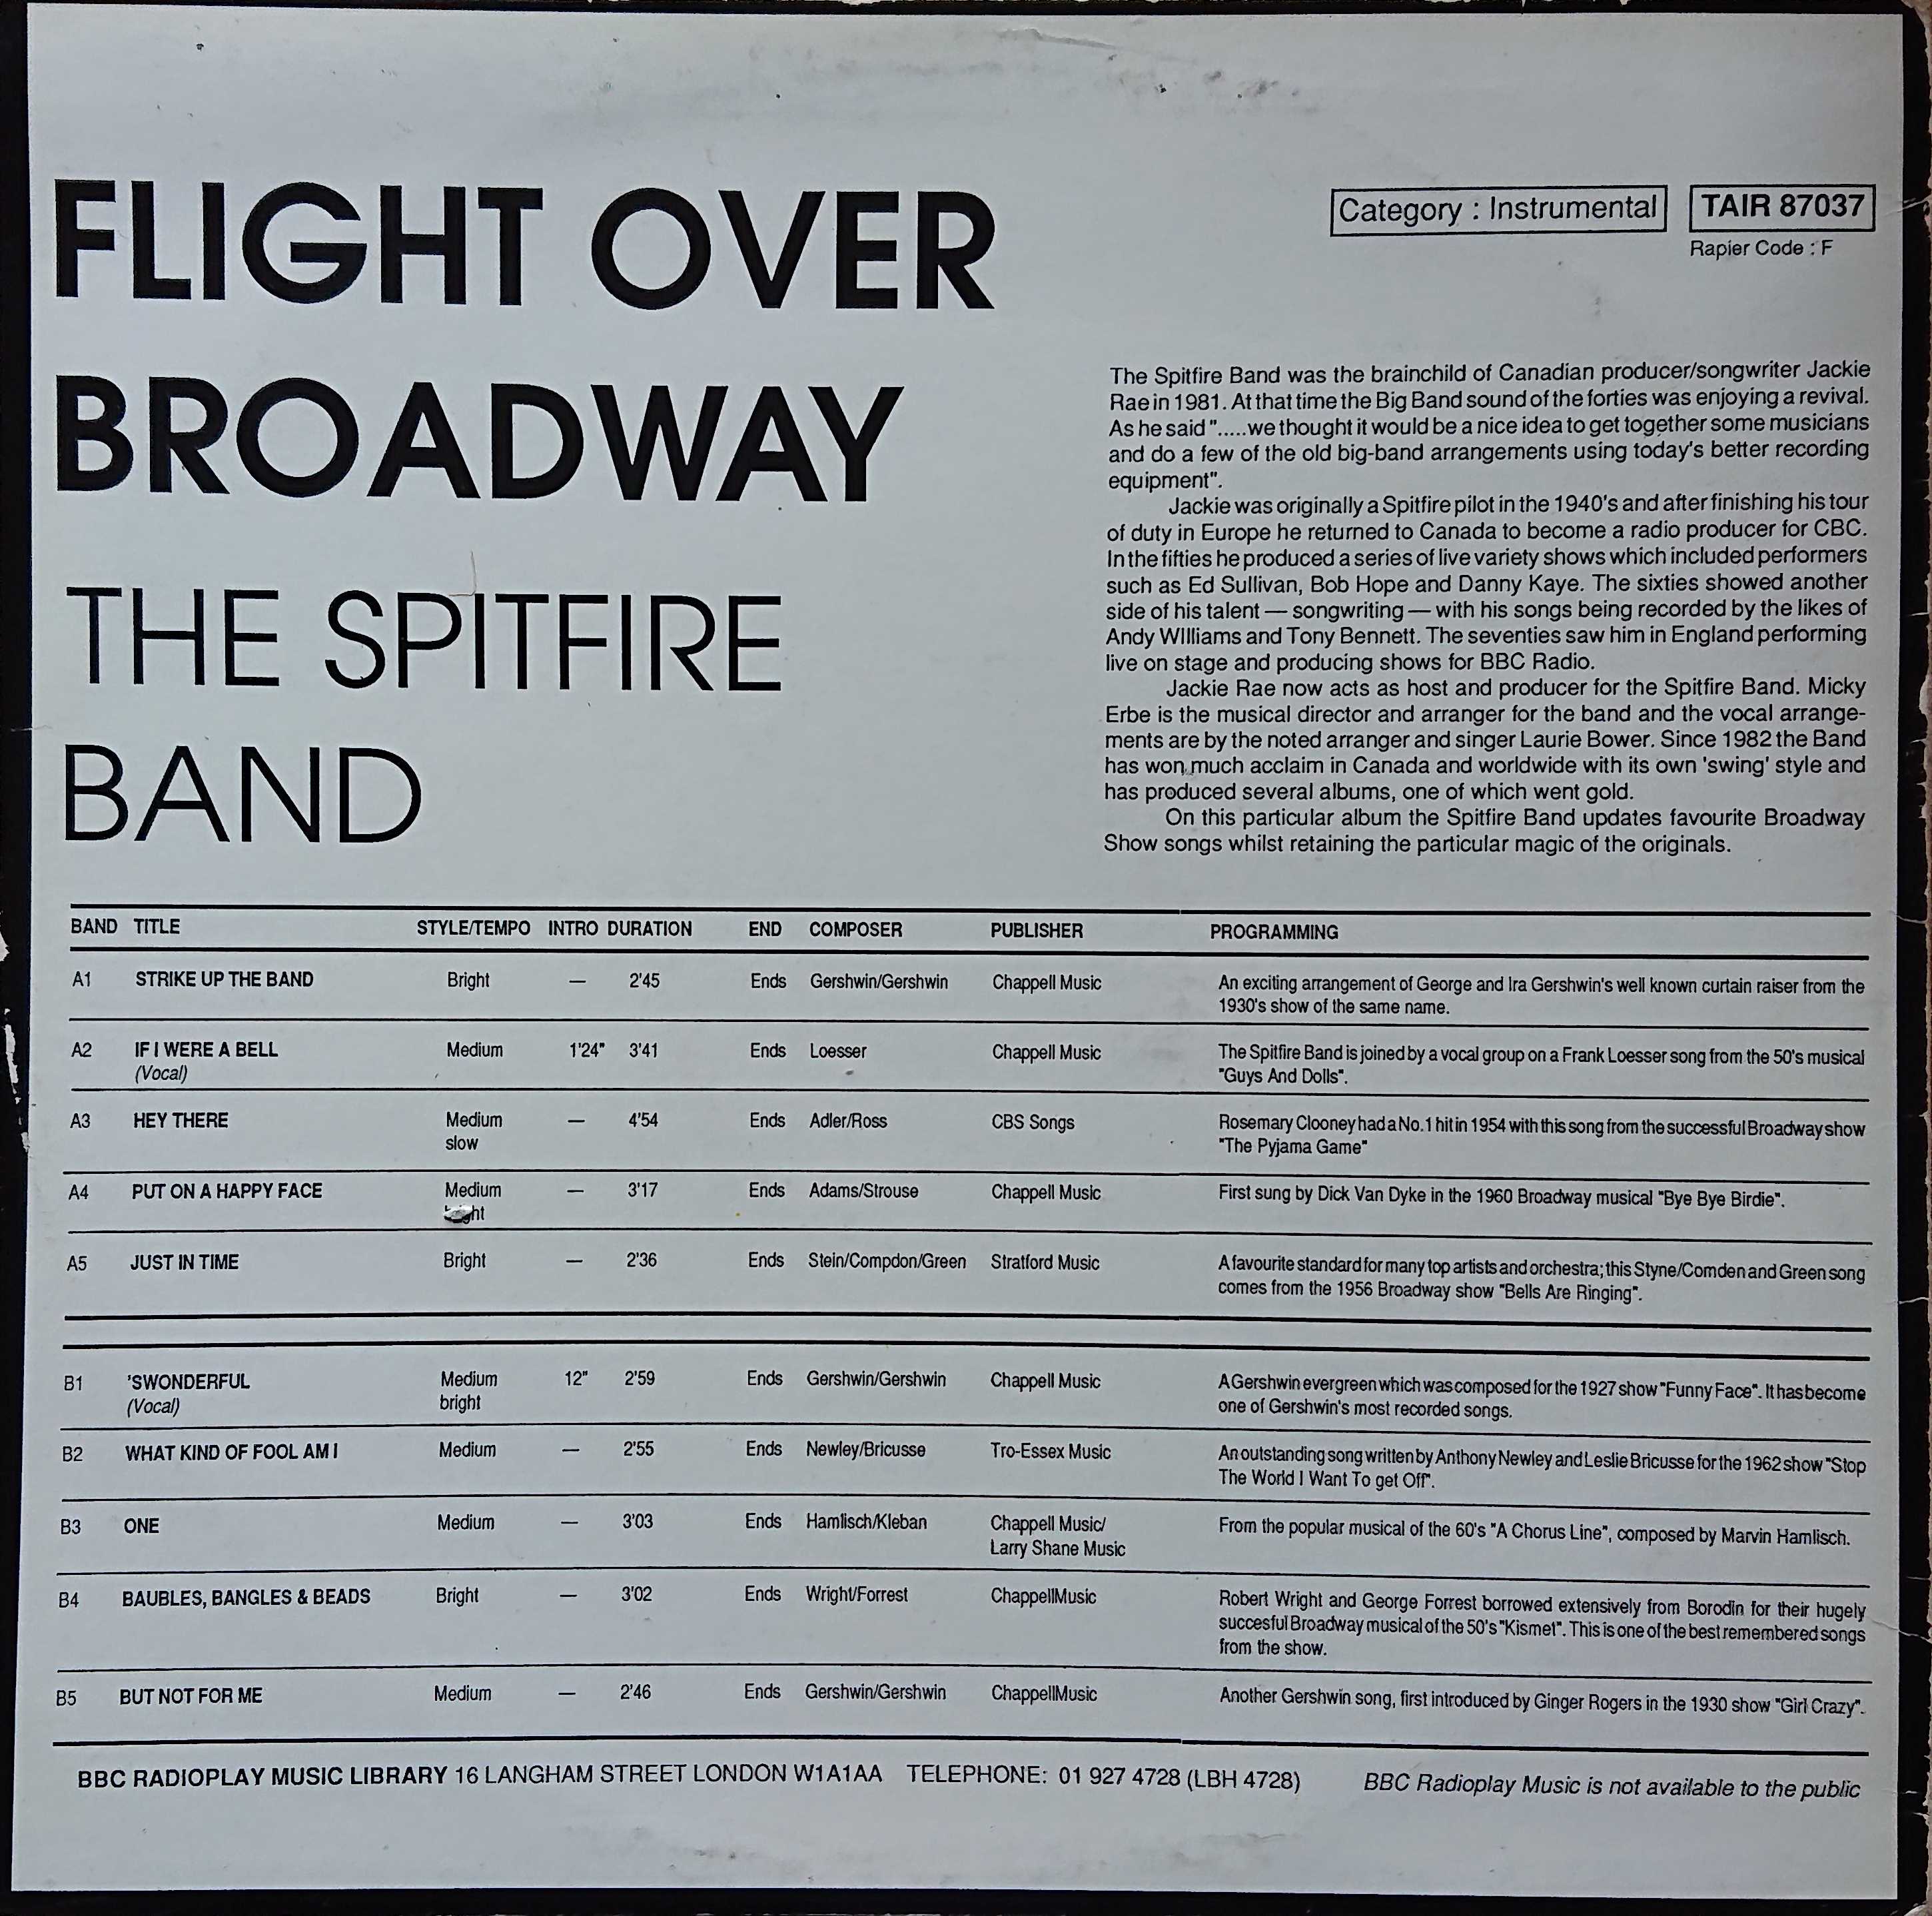 Picture of TAIR 87037 Flight over Broadway by artist The Spitfire Band from the BBC records and Tapes library